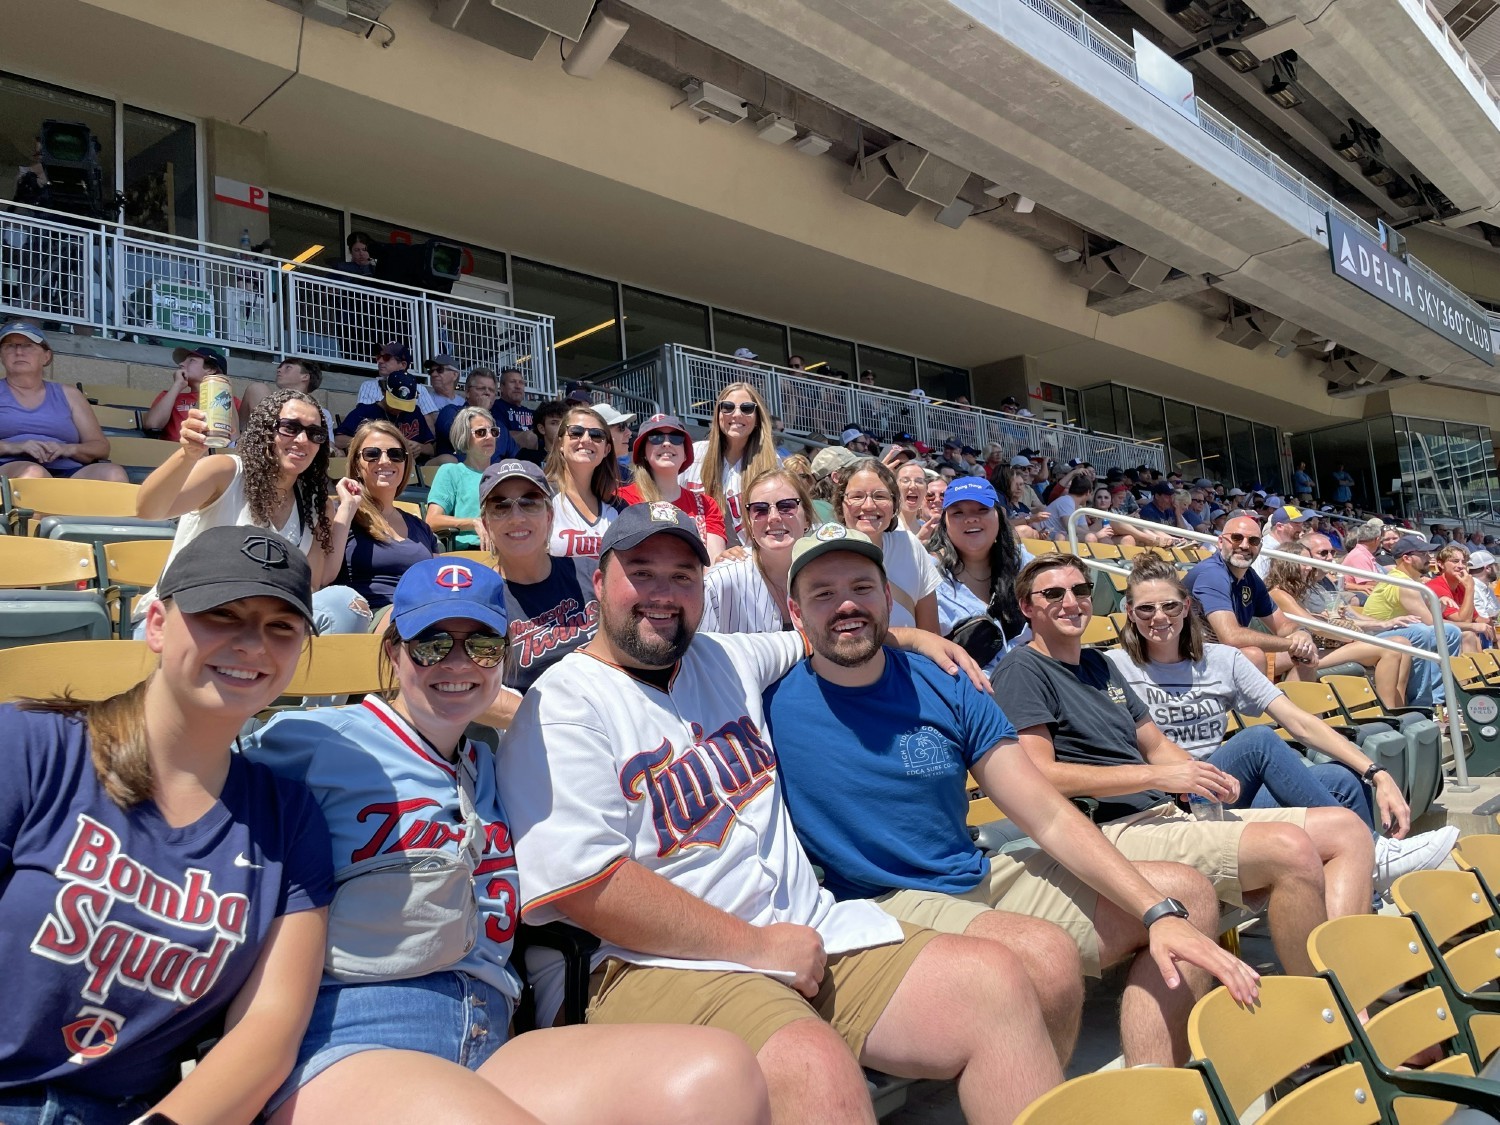 Company-wide summer outing to a Minnesota Twins baseball game.